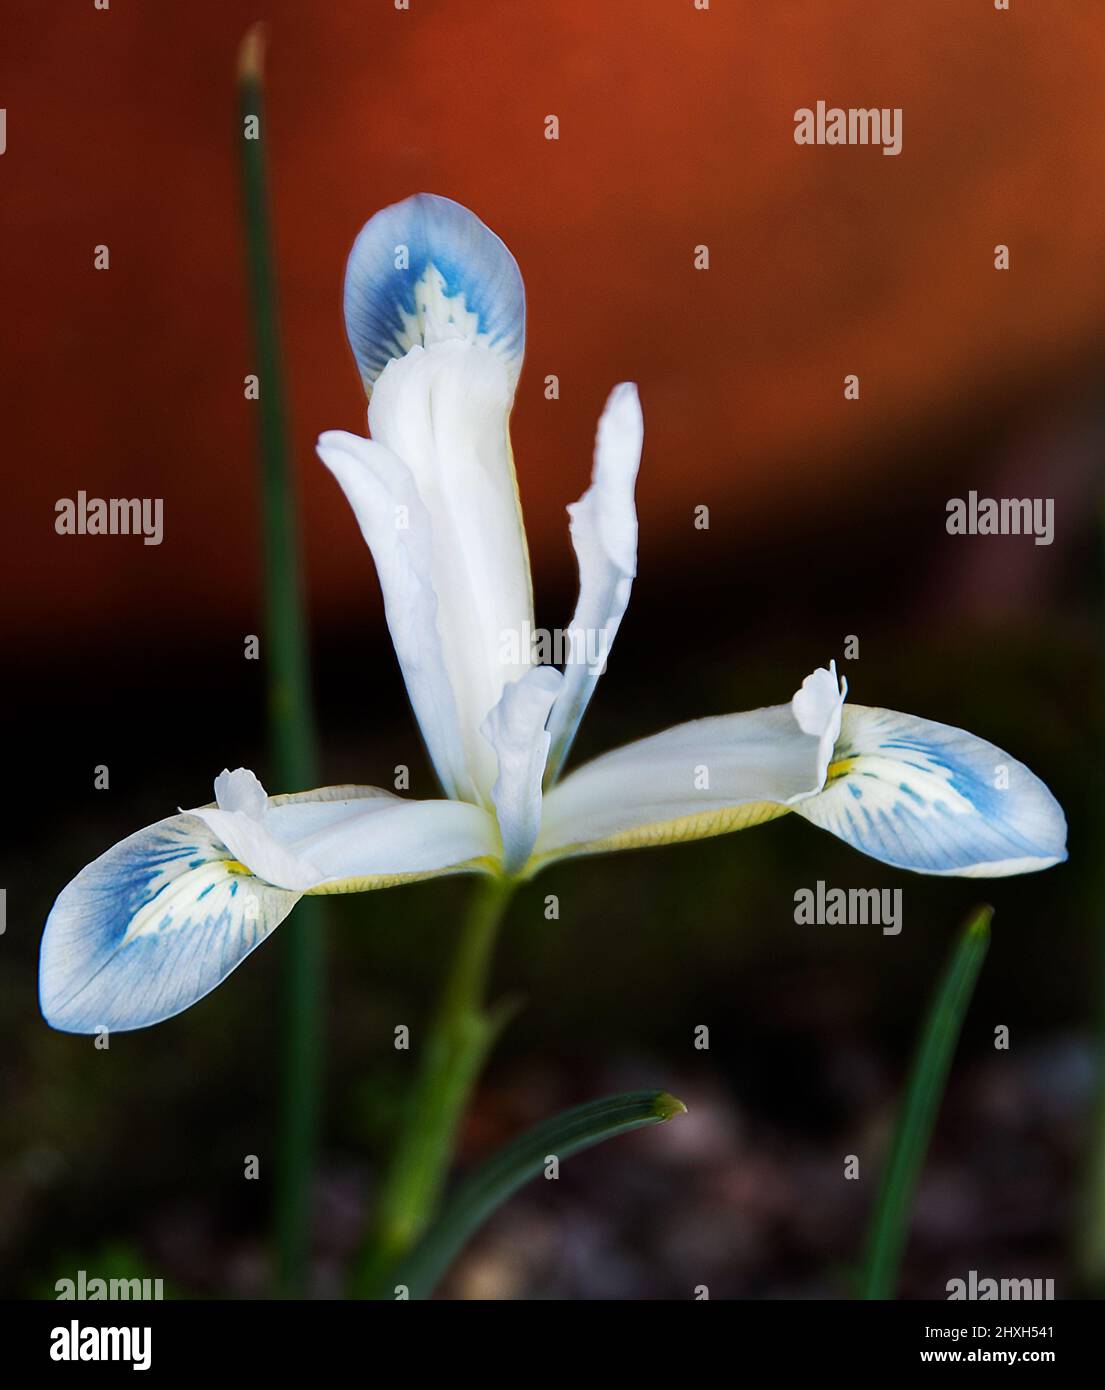 https://c8.alamy.com/comp/2HXH541/iris-reticulata-frozen-planet-iris-reticulata-frozen-planet-is-a-unique-variety-loved-for-its-white-petals-that-are-each-tipped-with-brushes-of-pas-2HXH541.jpg